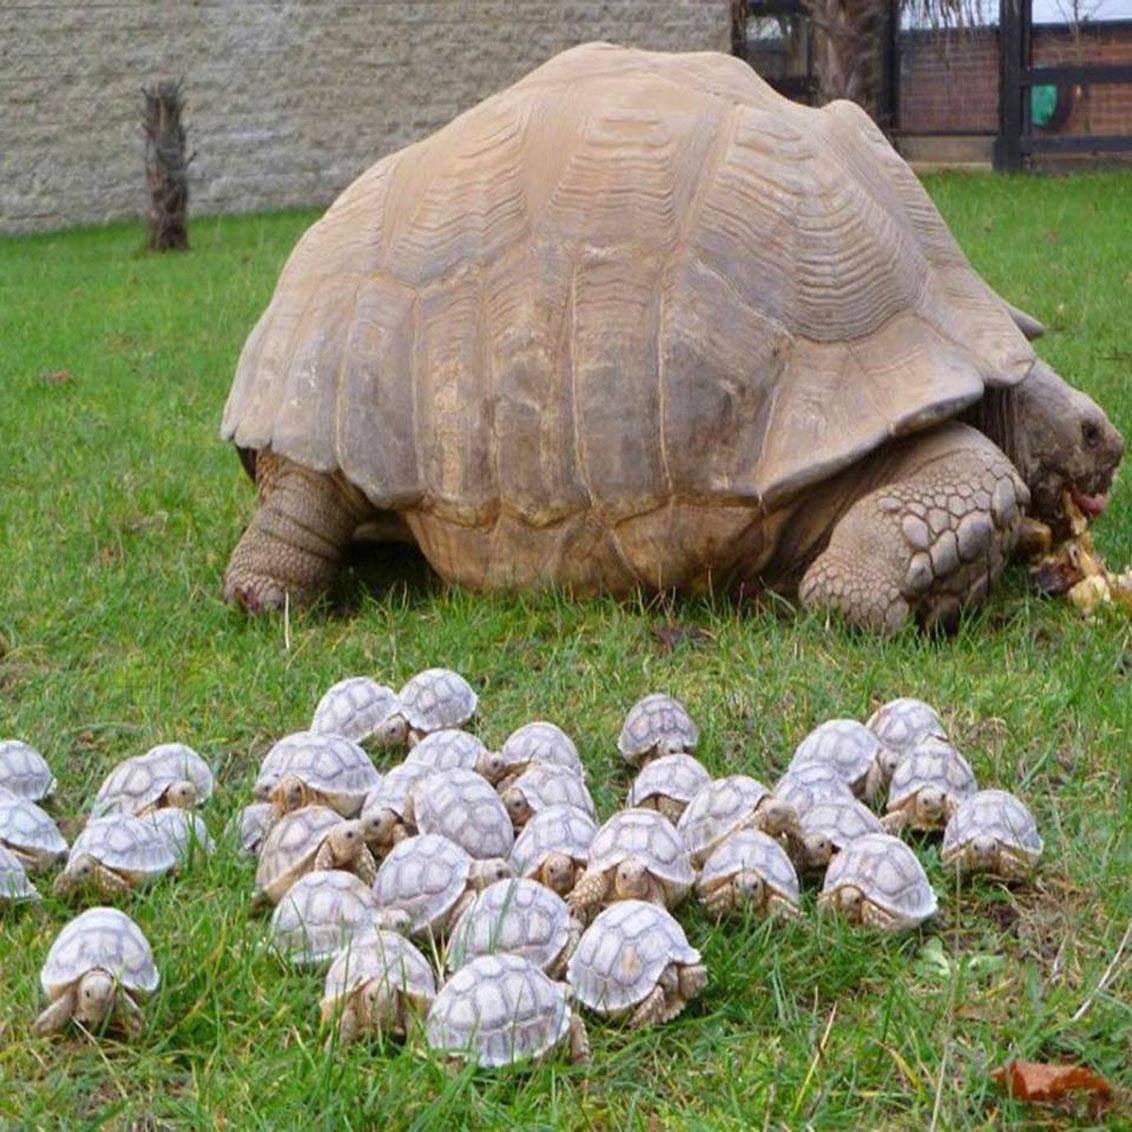 What are tortoises babies called?